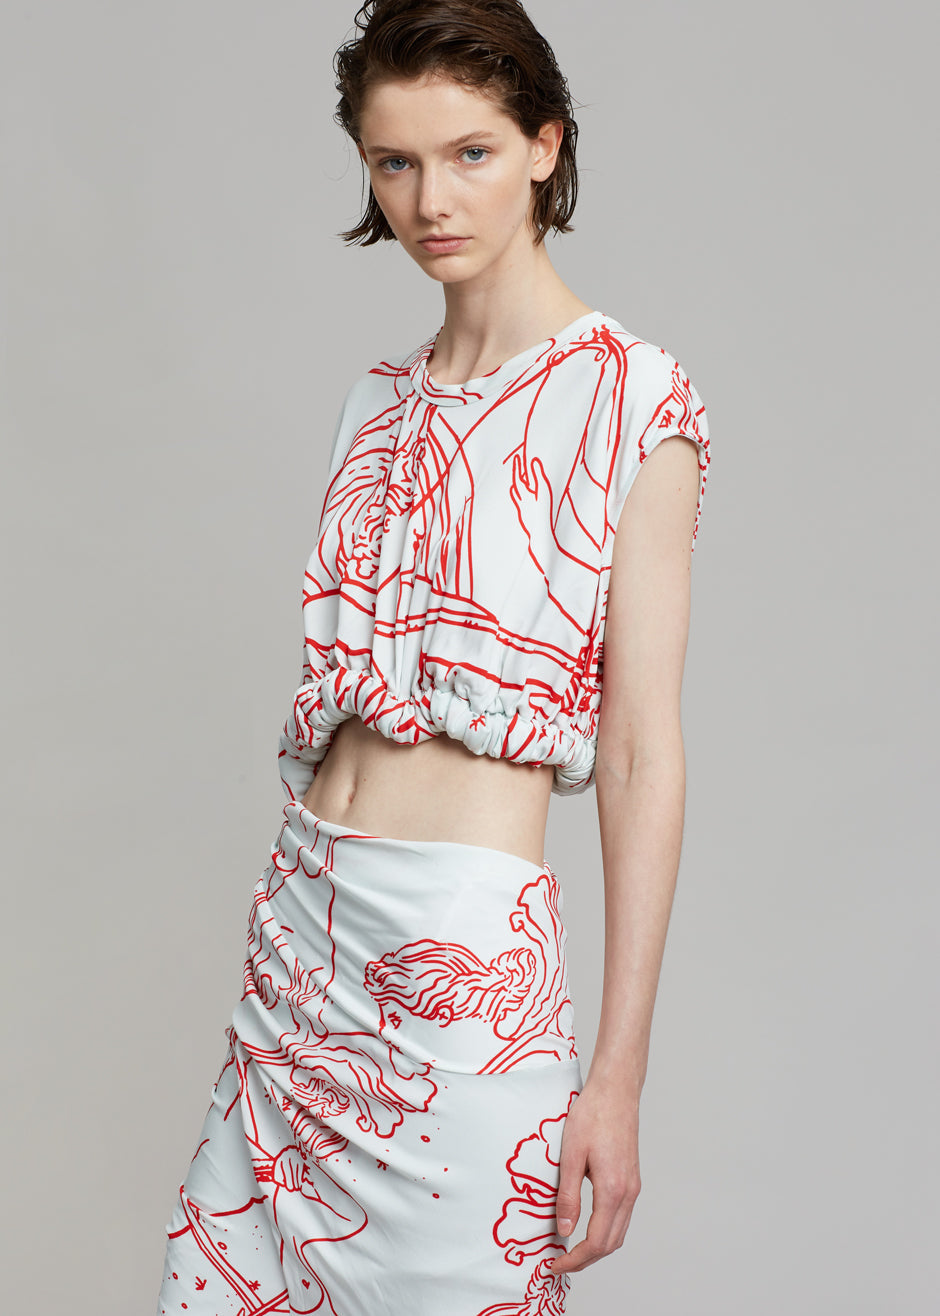 Christopher Esber Sculpted Twisted Tank Dress - Odyssey Print in Ice/Red - 3